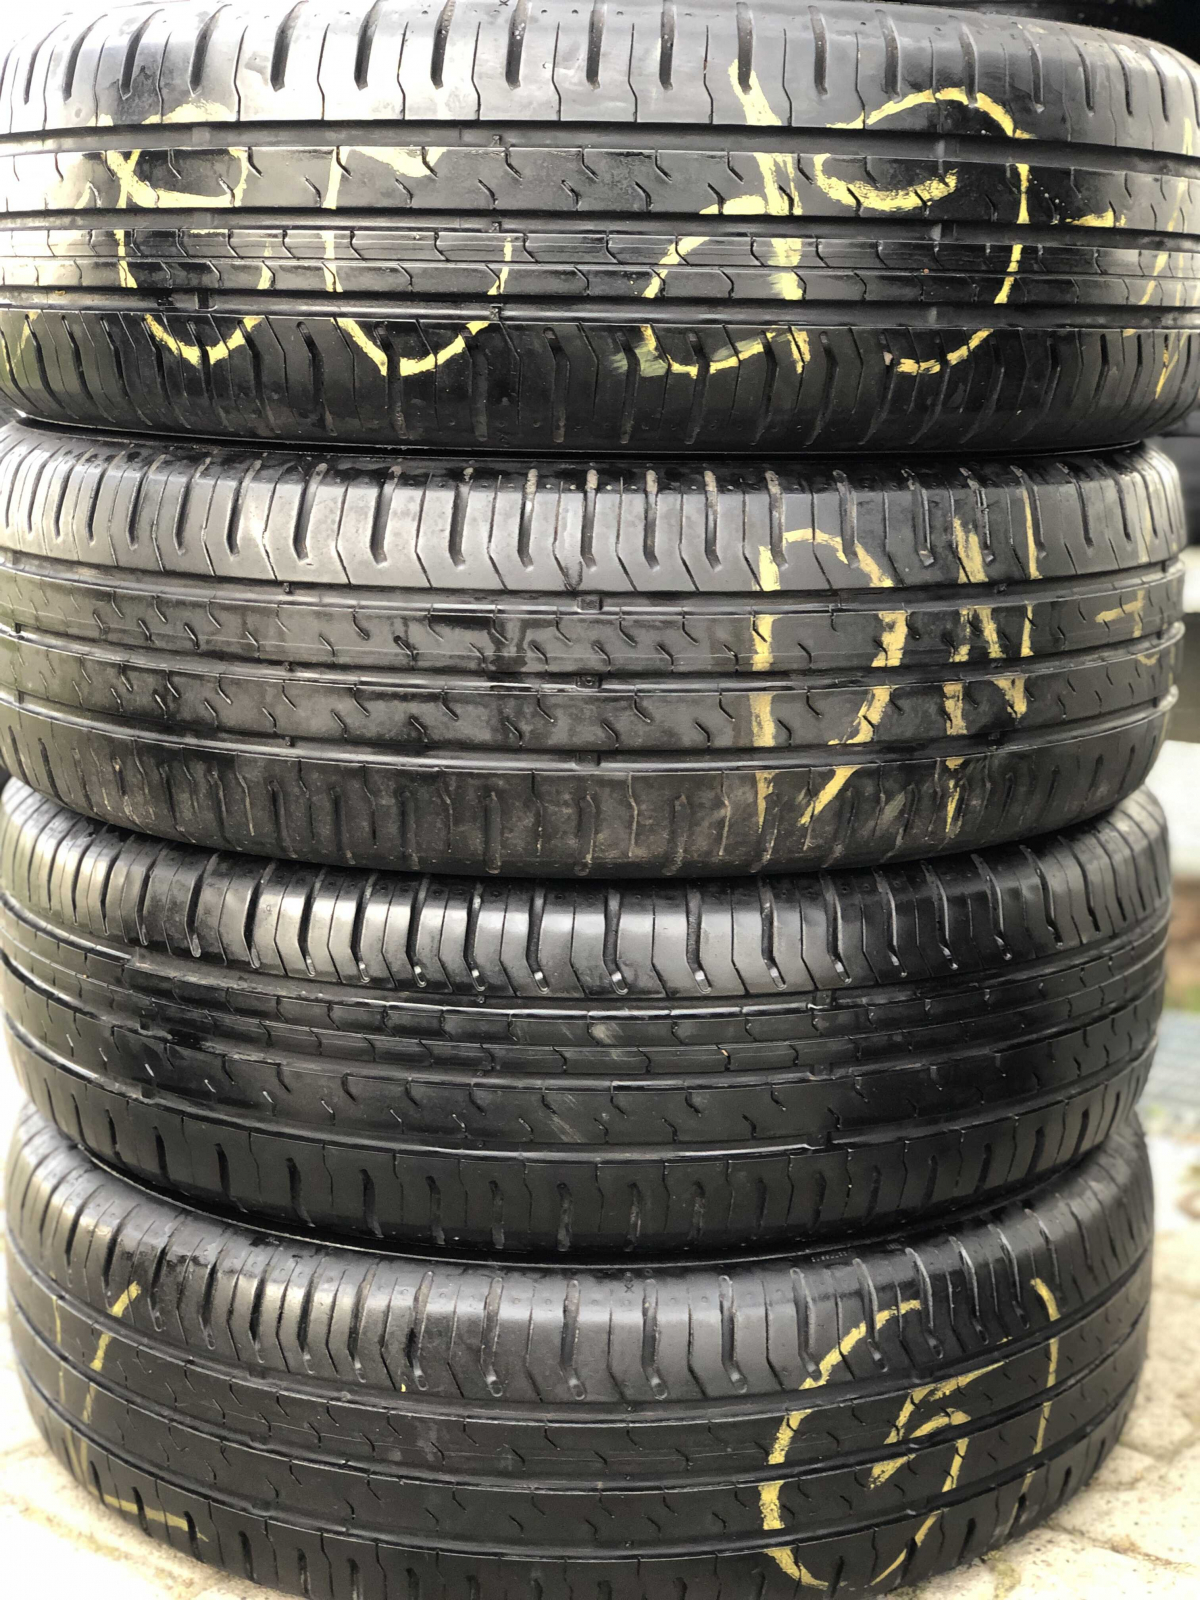 within Masculinity repent set 4 anvelope 185/65 R15 88H second hand vara Continental 6mm cu garantie